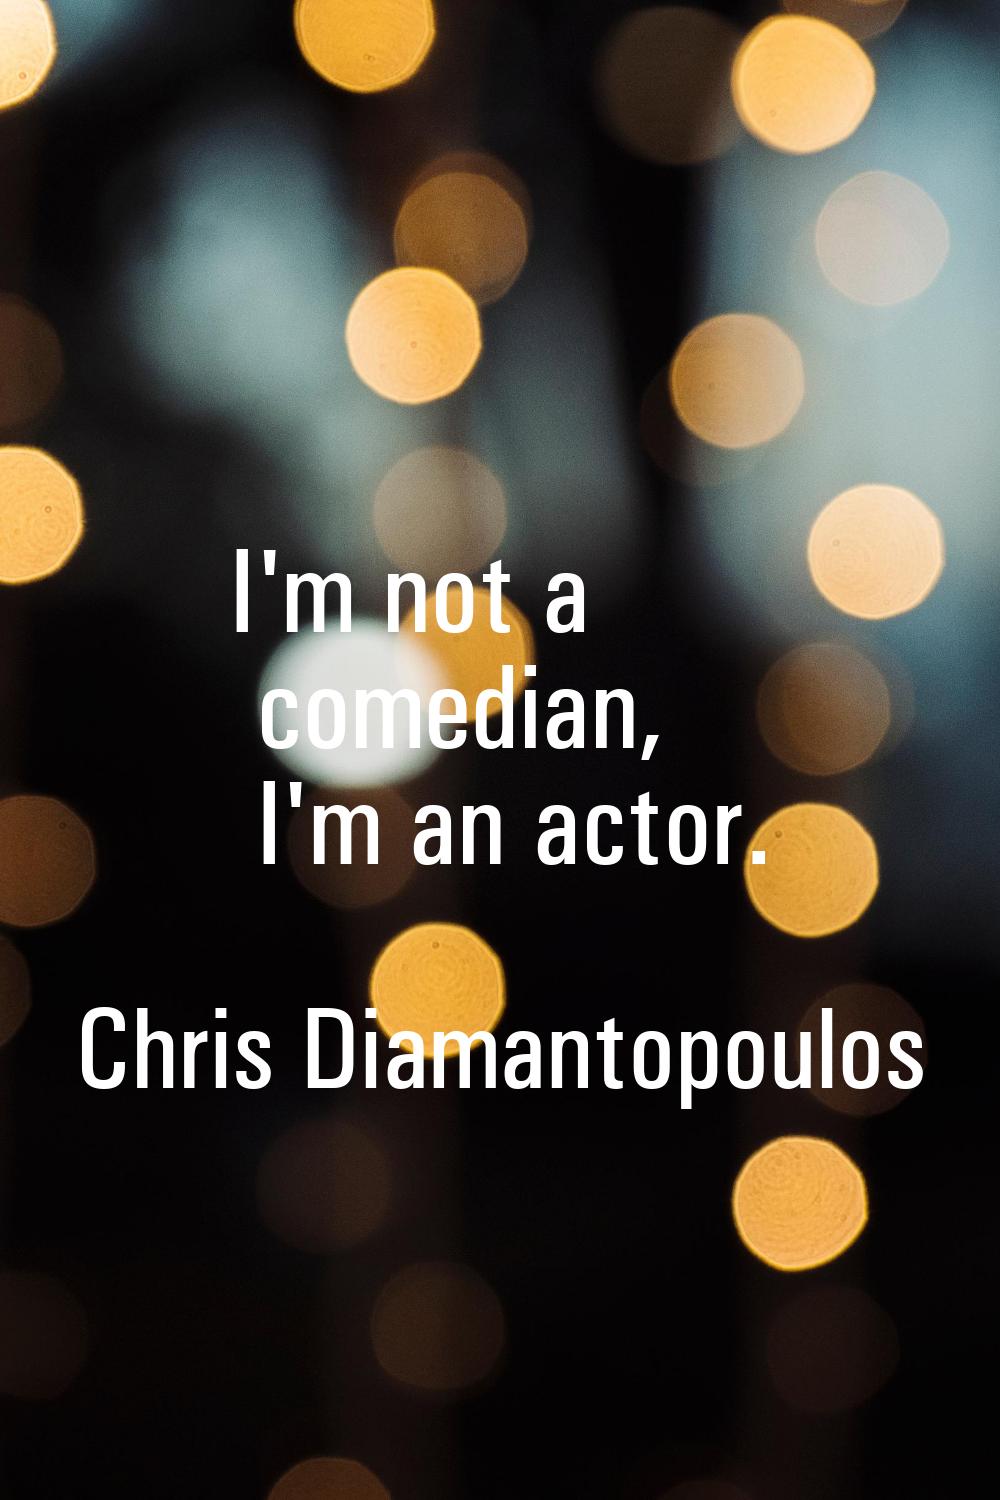 I'm not a comedian, I'm an actor.